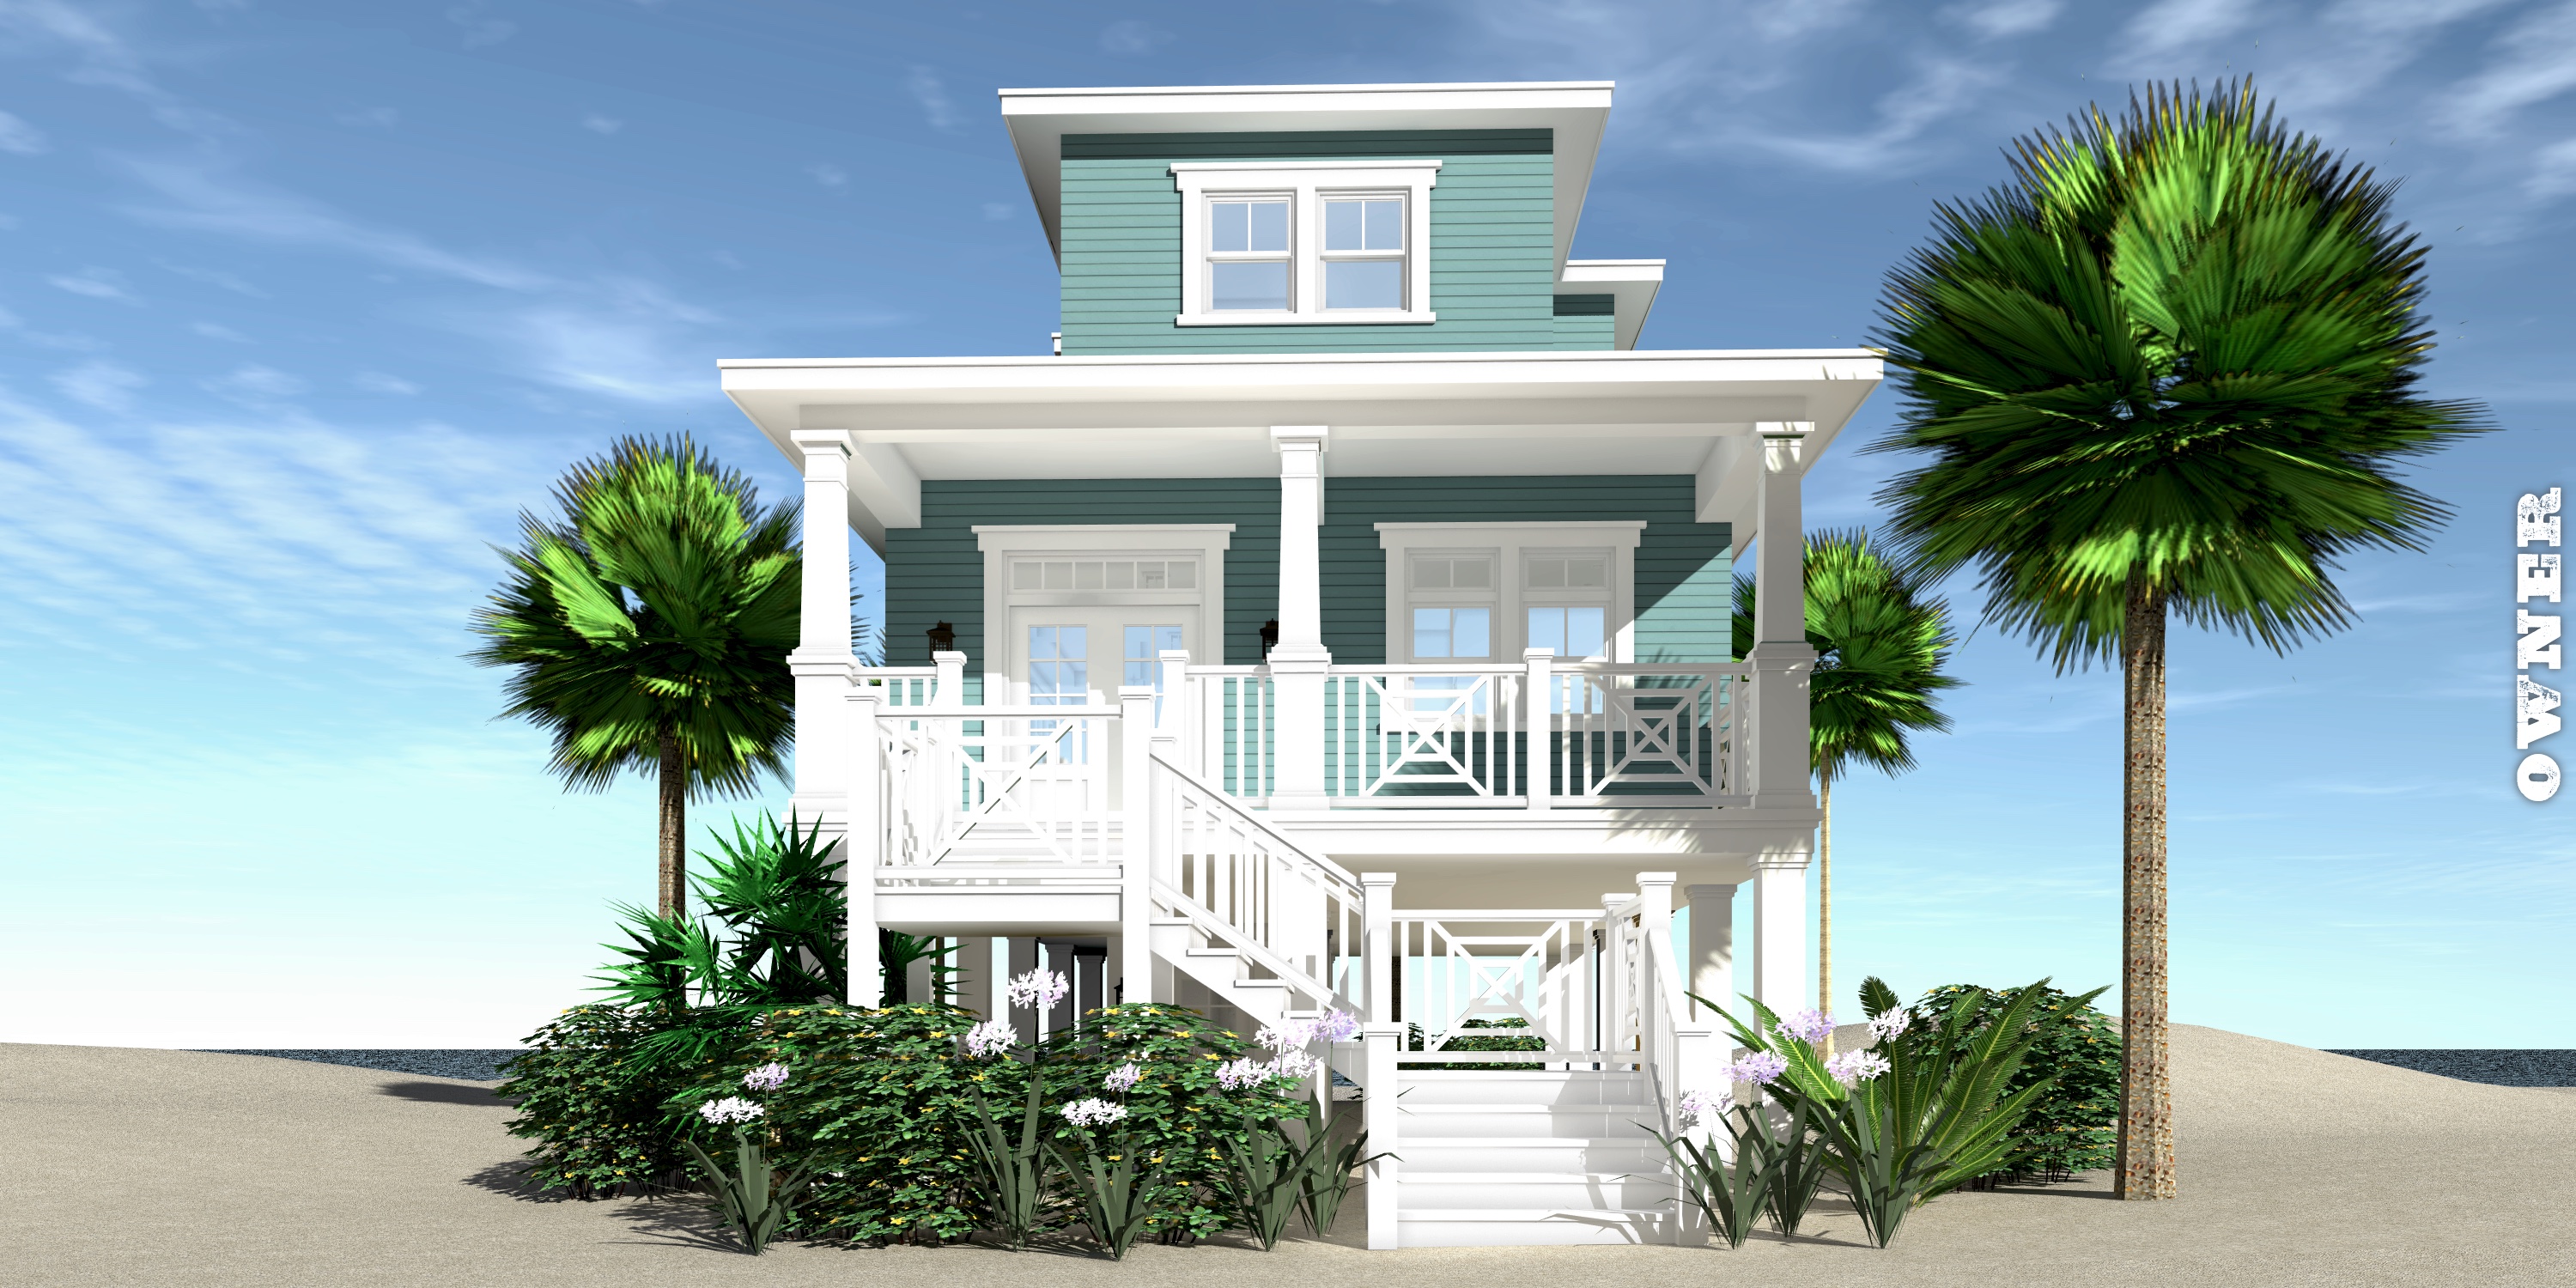 3 Bedroom Beach  House  Plan  with Storage Below Tyree House  Plans  